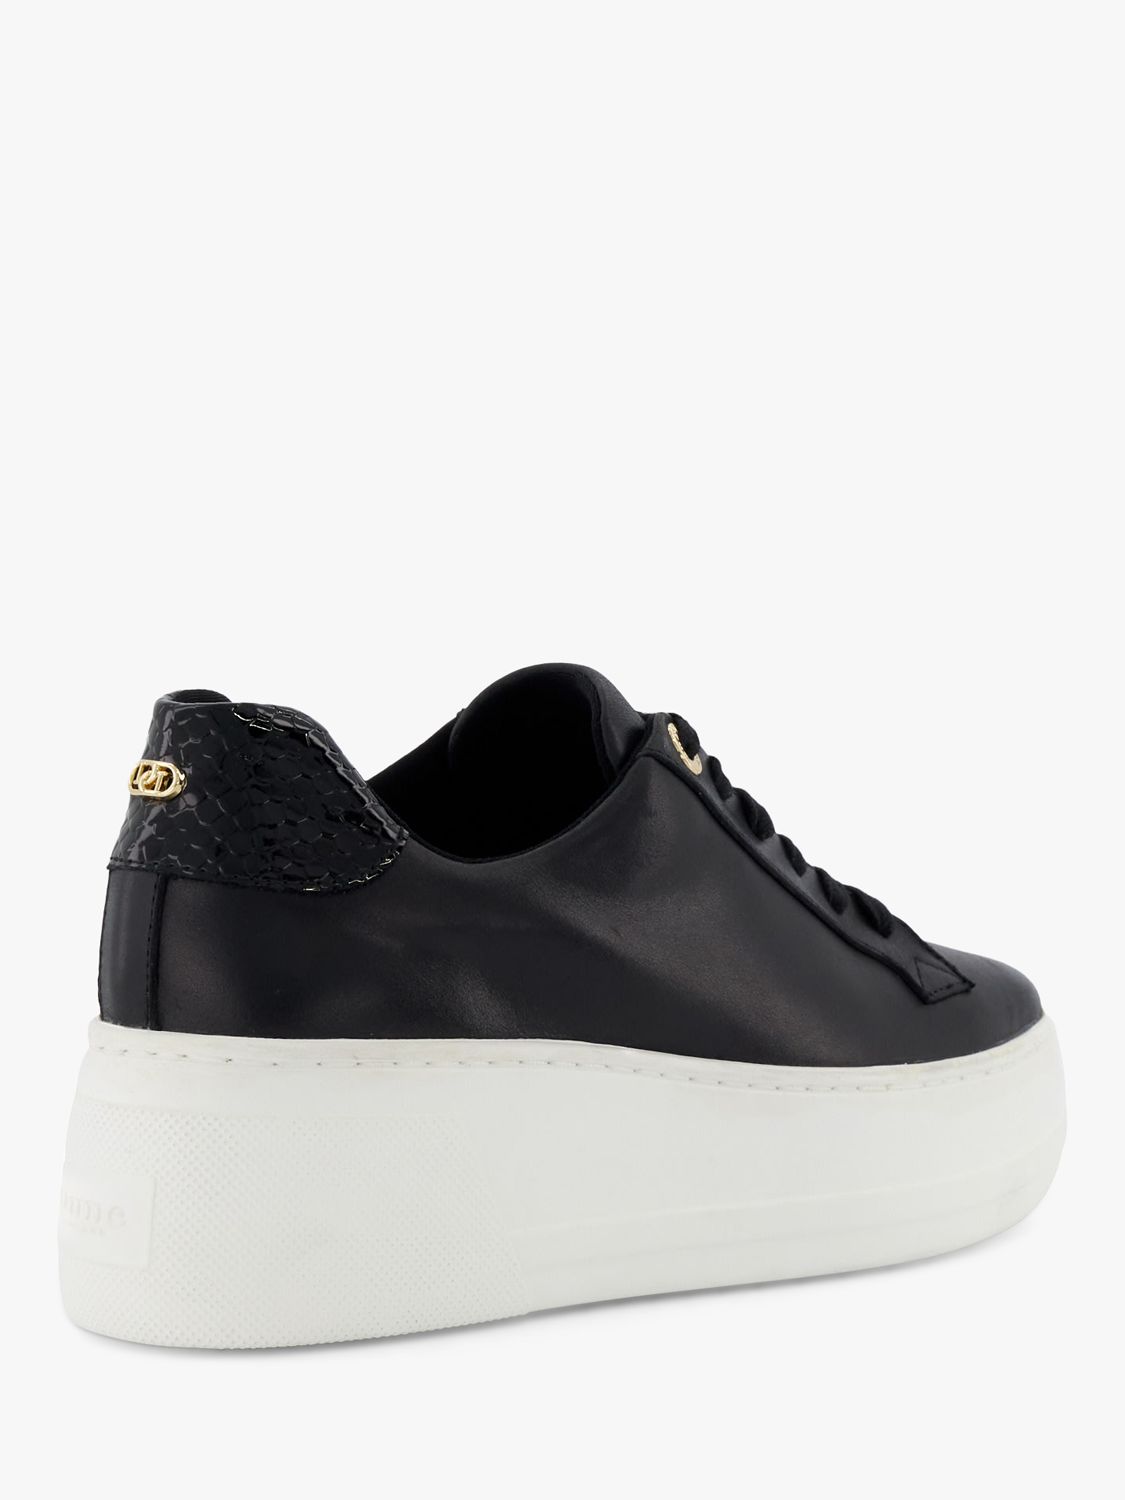 Buy Dune Episode Leather Reptile Detail Flatform Trainers Online at johnlewis.com